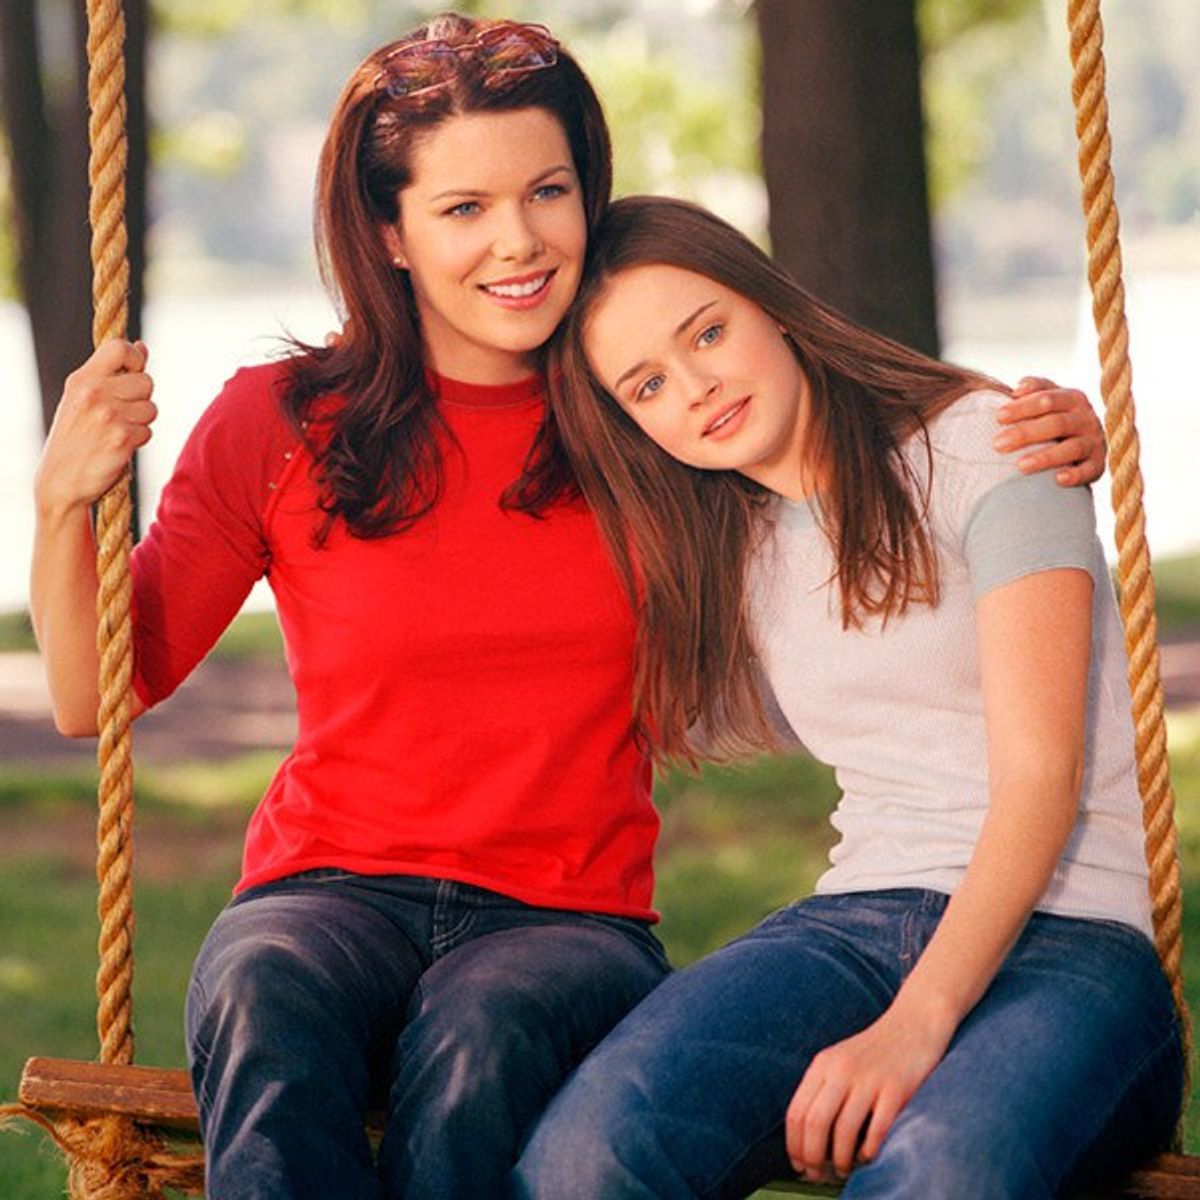 Life Lessons from Gilmore Girls